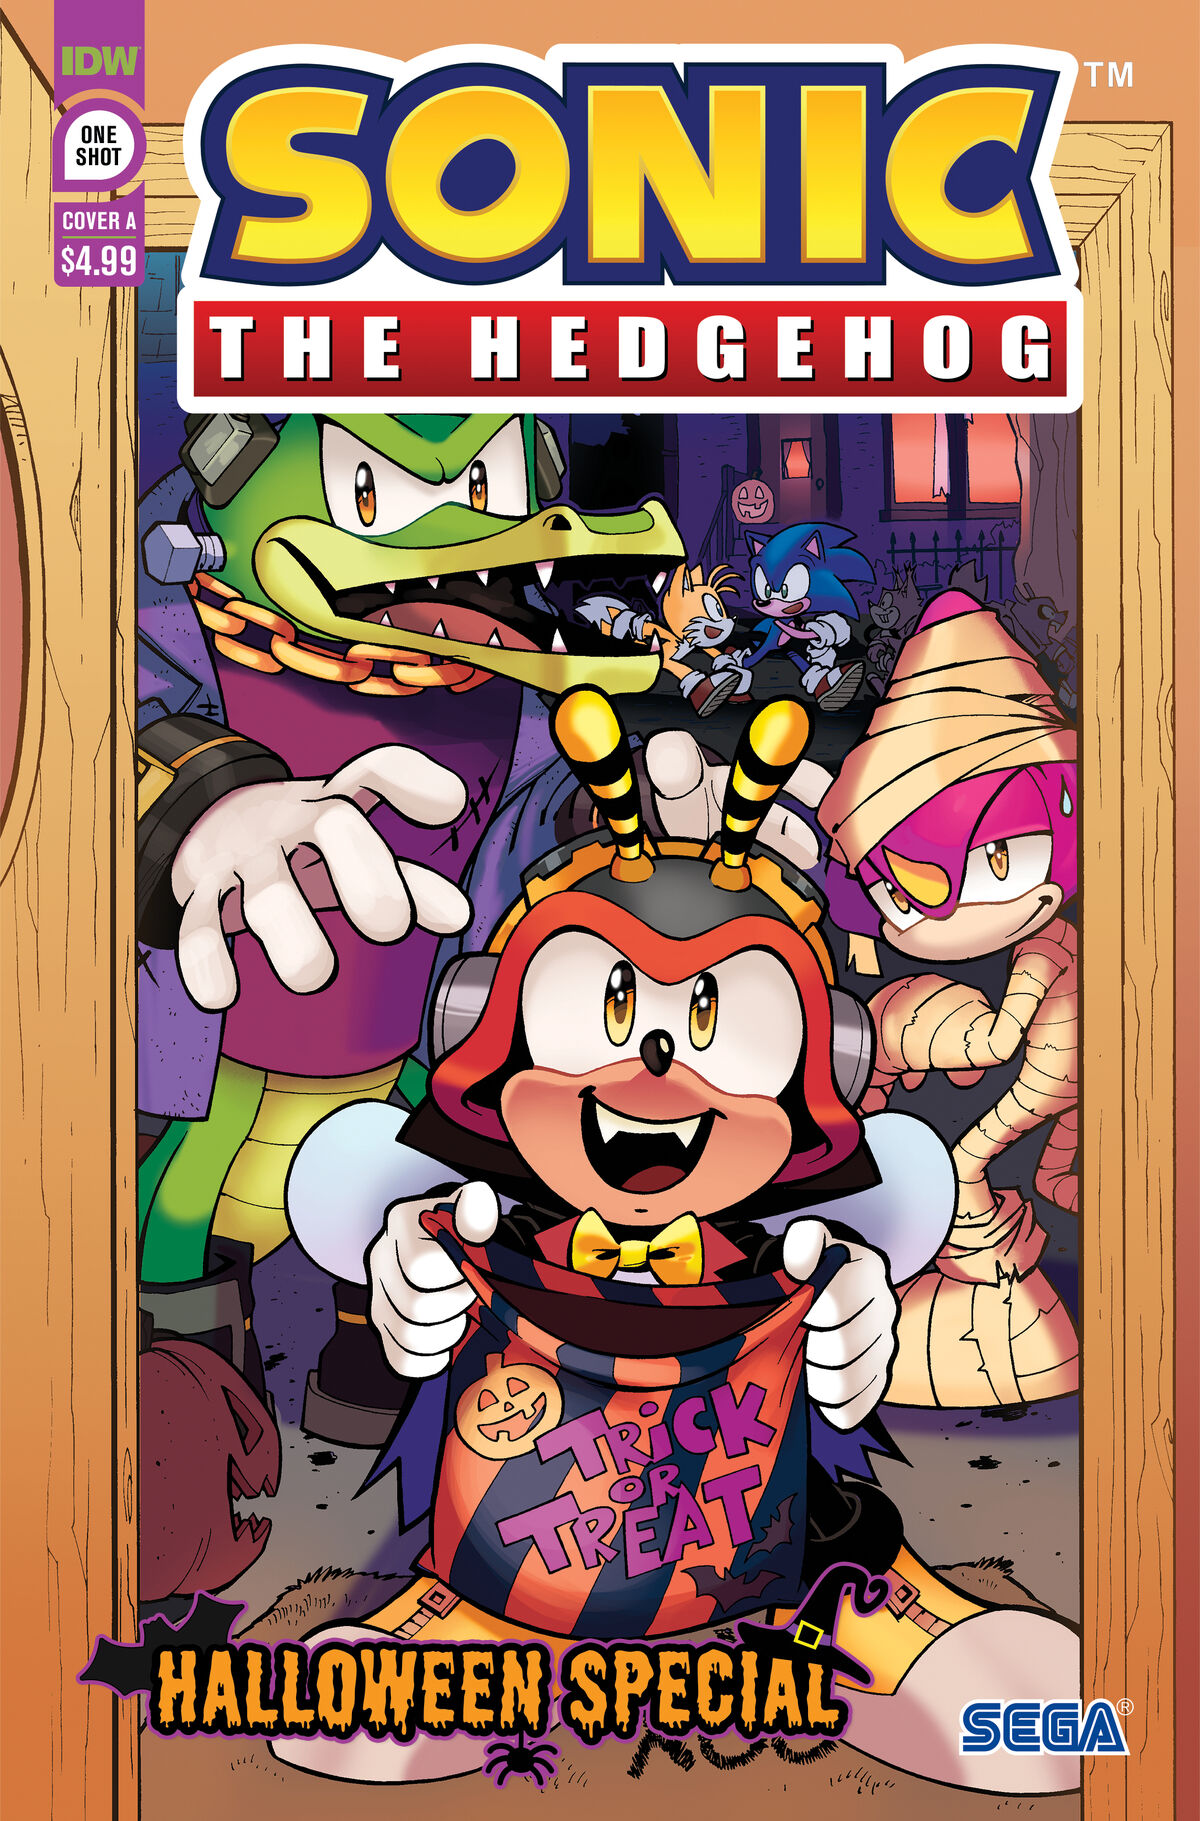 Sonic The Hedgehog 2: The Official Movie Poster Book - By Penguin